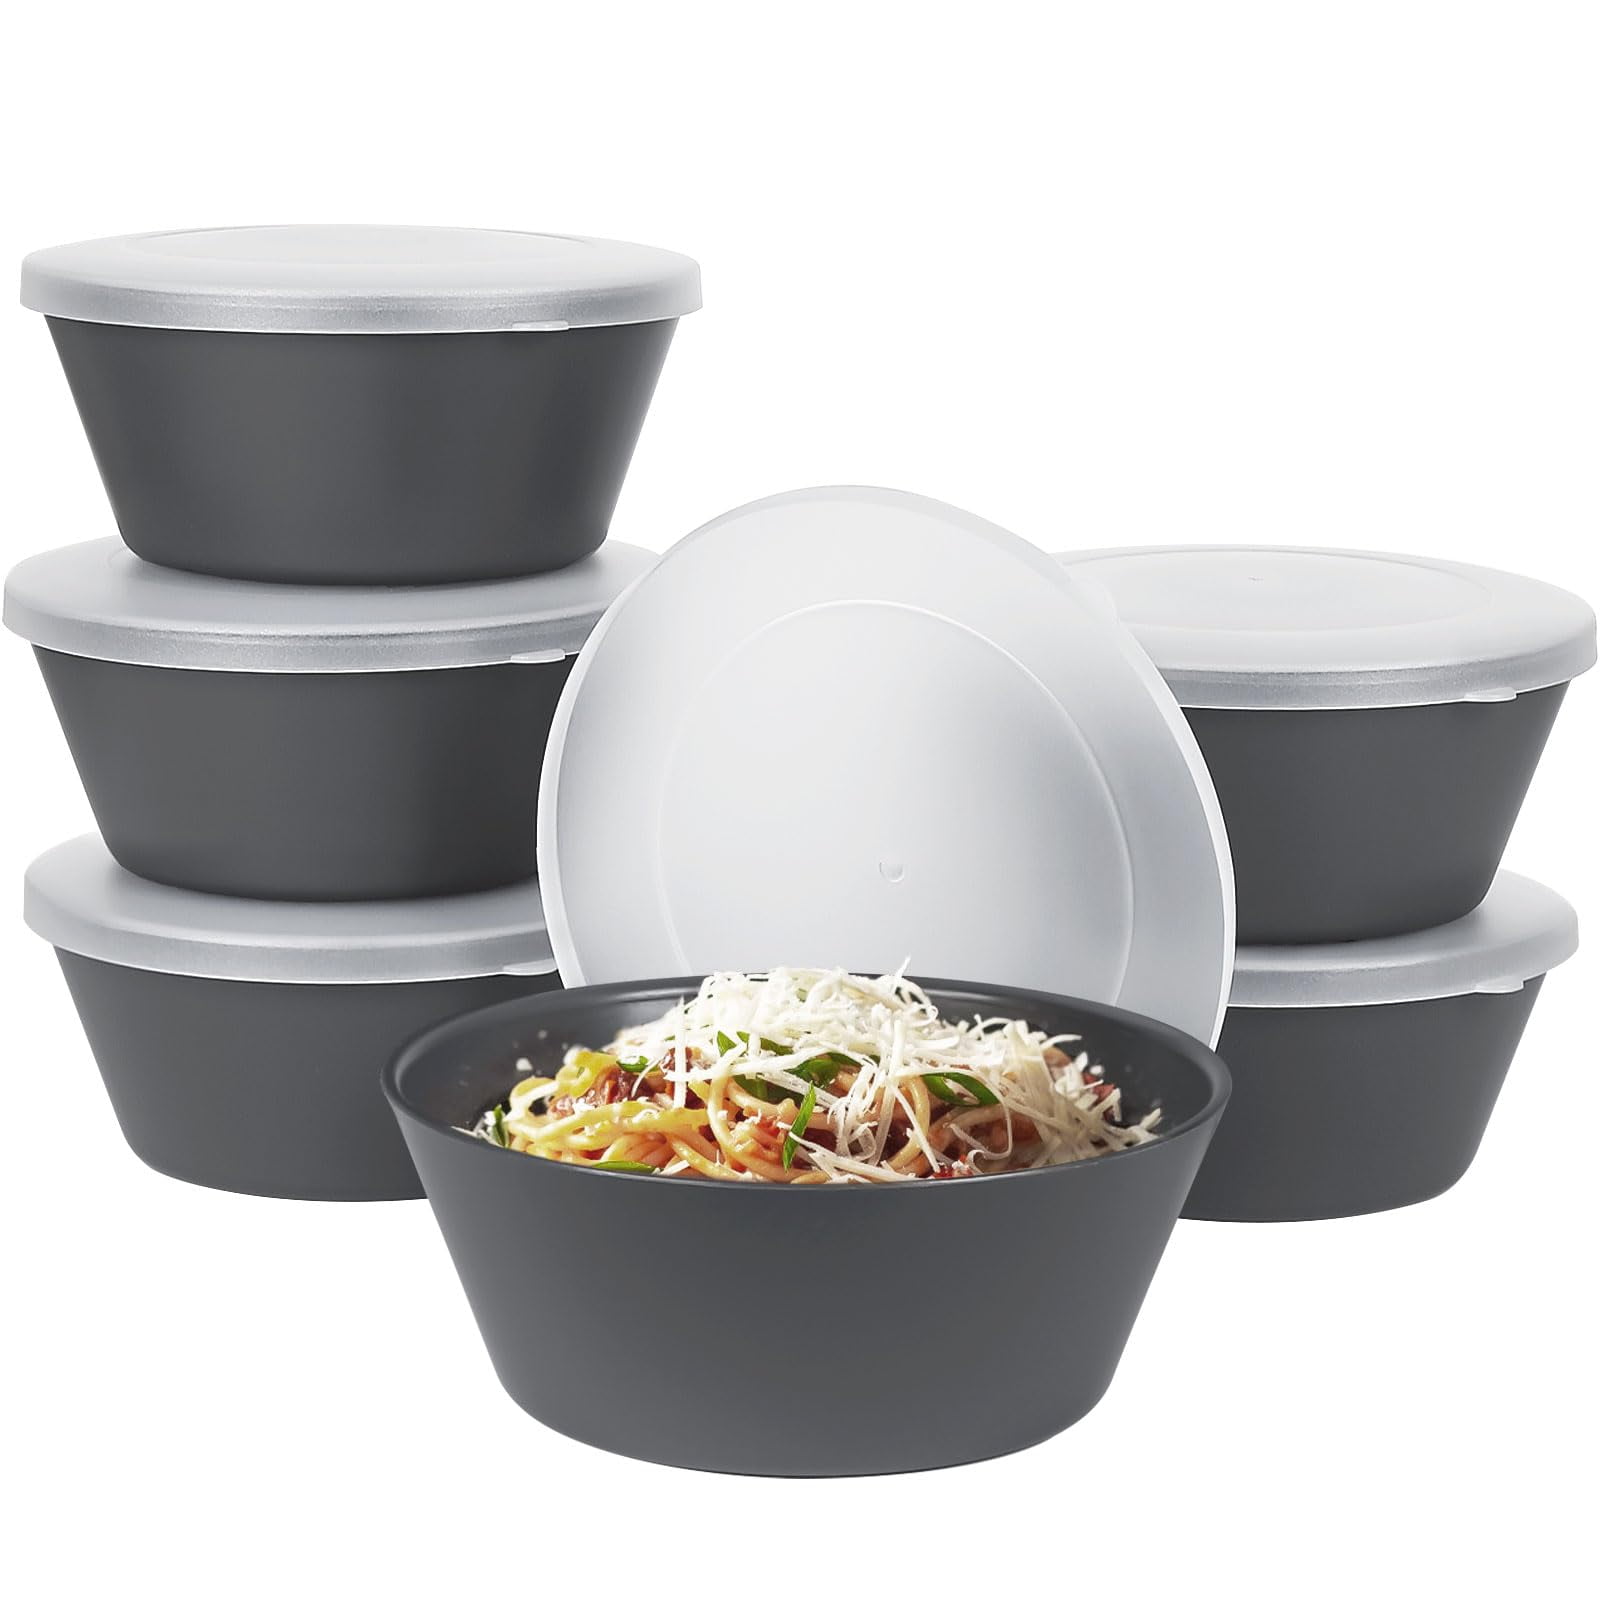 Adewnest Ceramic Bowl with Lid: Soup Bowls with Lids Microwave Safe - Food  Prep Bowls with Lids - Salad Bowls Set of 4 for Lunch, Picnic, Camping 